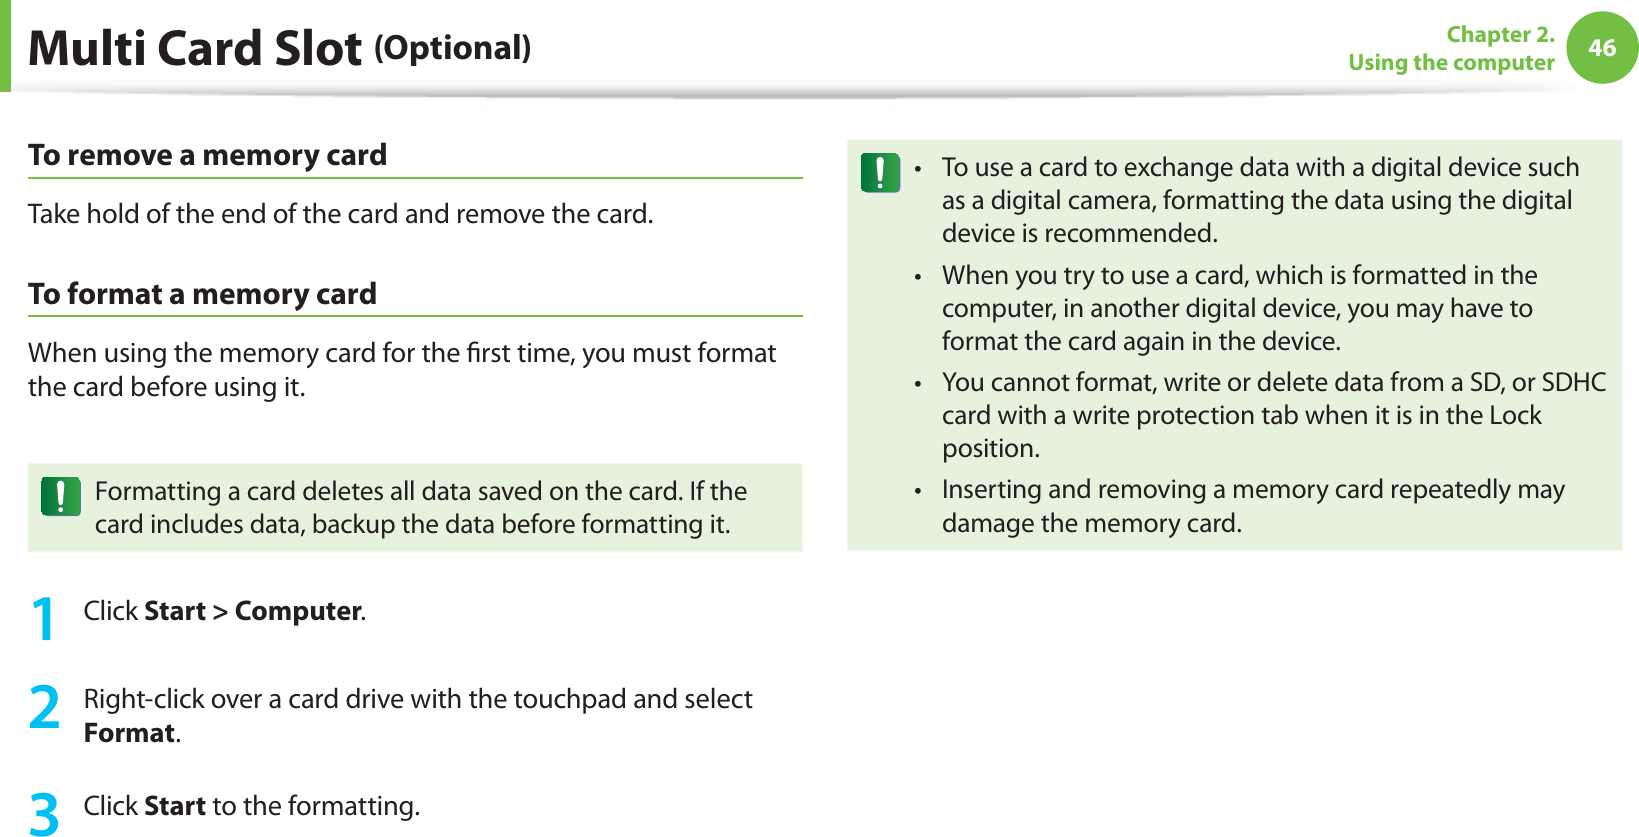 46Chapter 2.  Using the computerTo remove a memory cardTake hold of the end of the card and remove the card.To format a memory cardWhen using the memory card for the rst time, you must format the card before using it.Formatting a card deletes all data saved on the card. If the card includes data, backup the data before formatting it.1 Click Start &gt; Computer.2  Right-click over a card drive with the touchpad and select Format.3 Click Start to the formatting.To use a card to exchange data with a digital device such t as a digital camera, formatting the data using the digital device is recommended.When you try to use a card, which is formatted in the t computer, in another digital device, you may have to format the card again in the device.You cannot format, write or delete data from a SD, or SDHC t card with a write protection tab when it is in the Lock position.Inserting and removing a memory card repeatedly may t damage the memory card.Multi Card Slot (Optional)